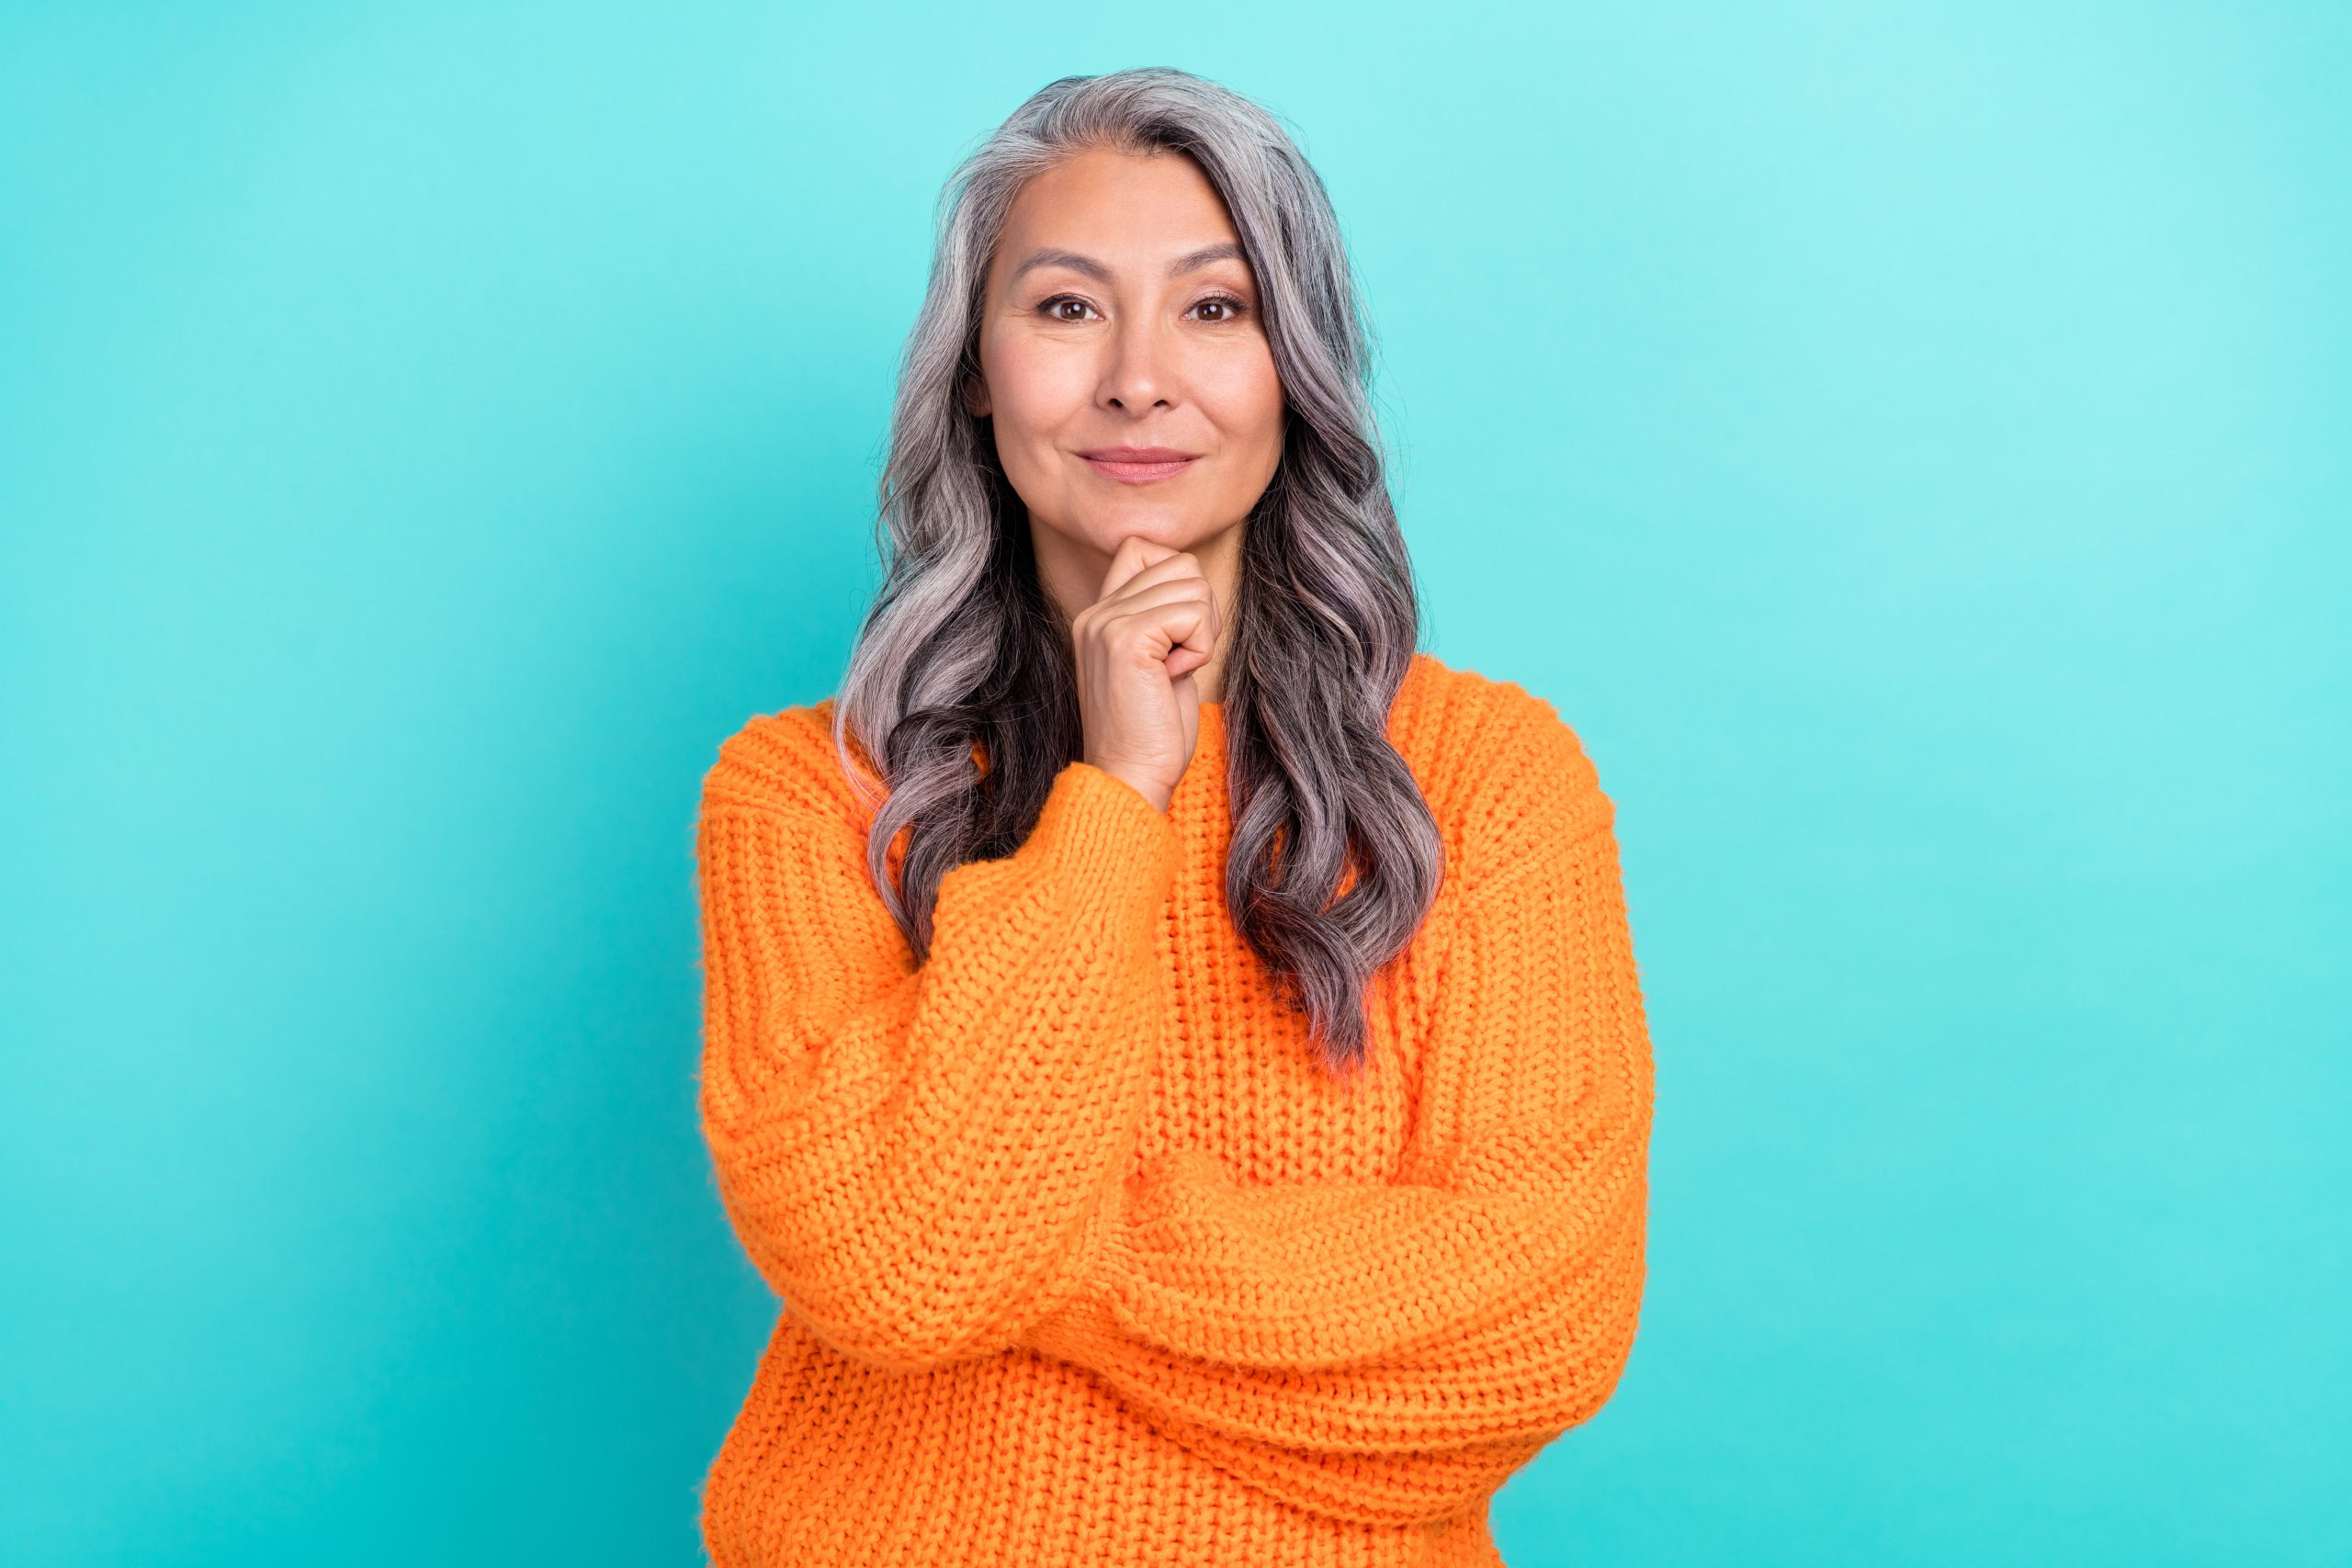 Portrait of a grey-haired woman with her hand on her chin standing in front of a teal turquoise background.